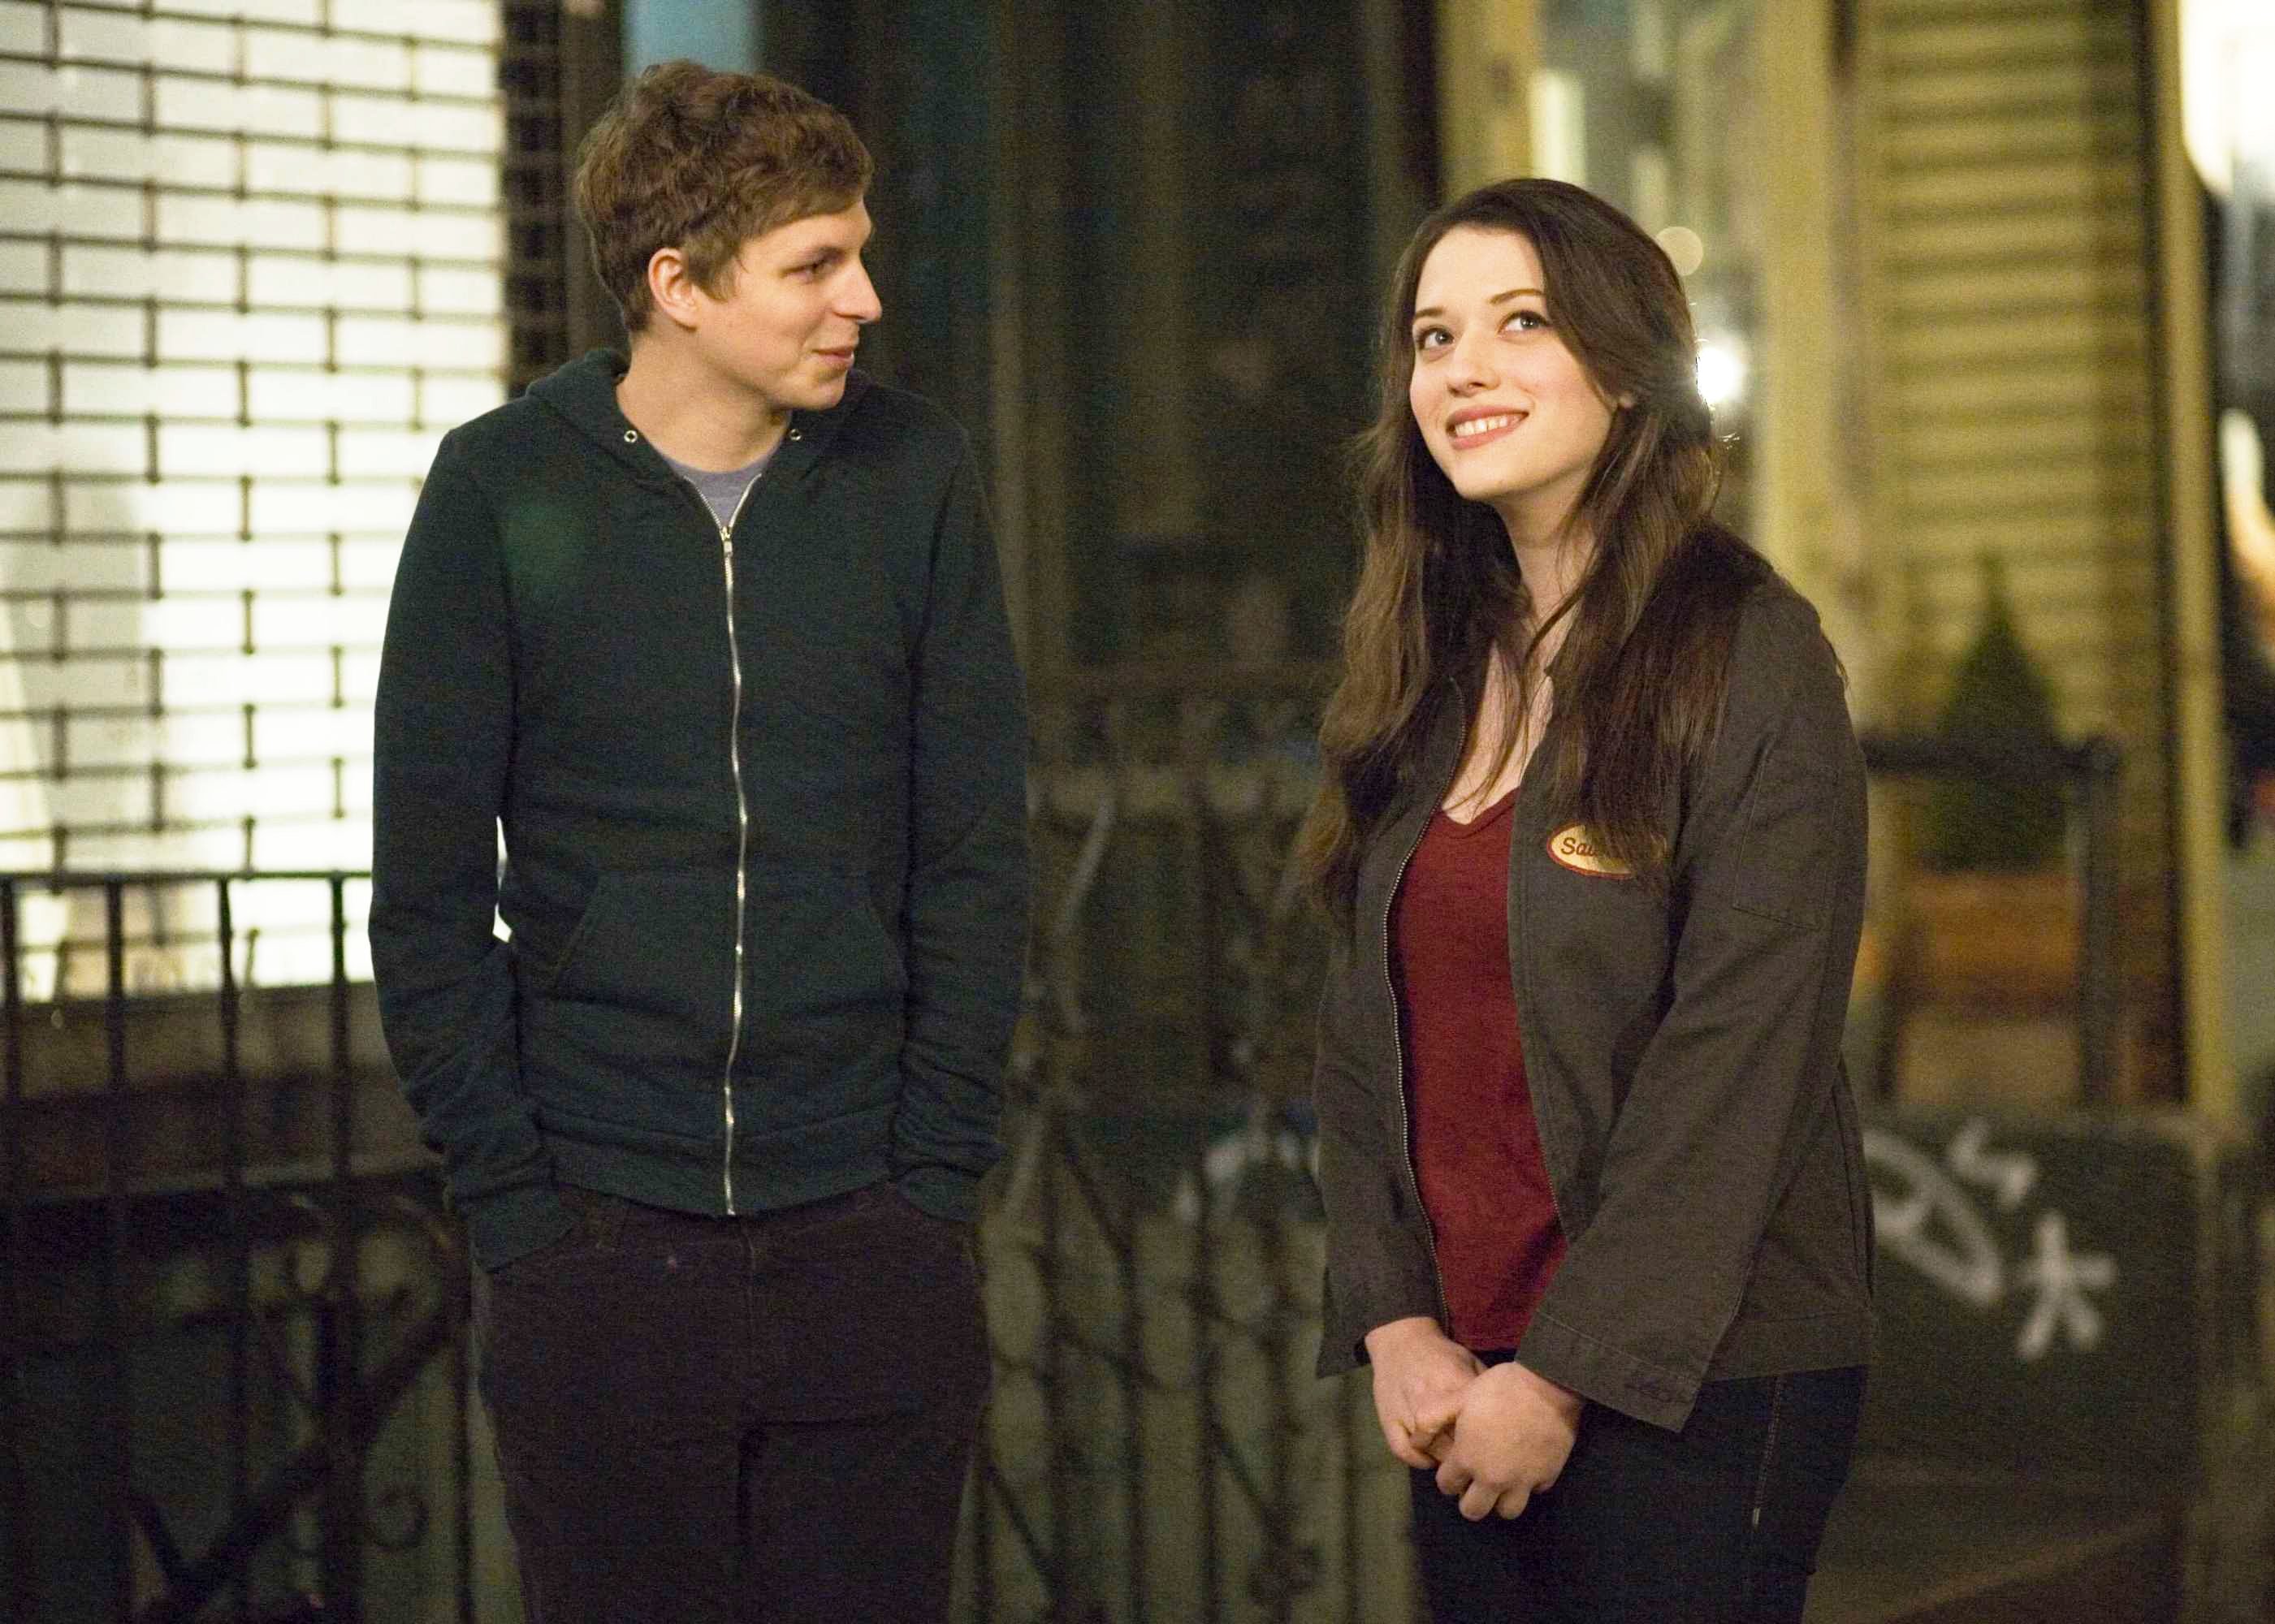 Michael Cera stars as Nick and Kat Dennings stars as Norah in Sony Pictures' Nick and Norah's Infinite Playlist (2008)